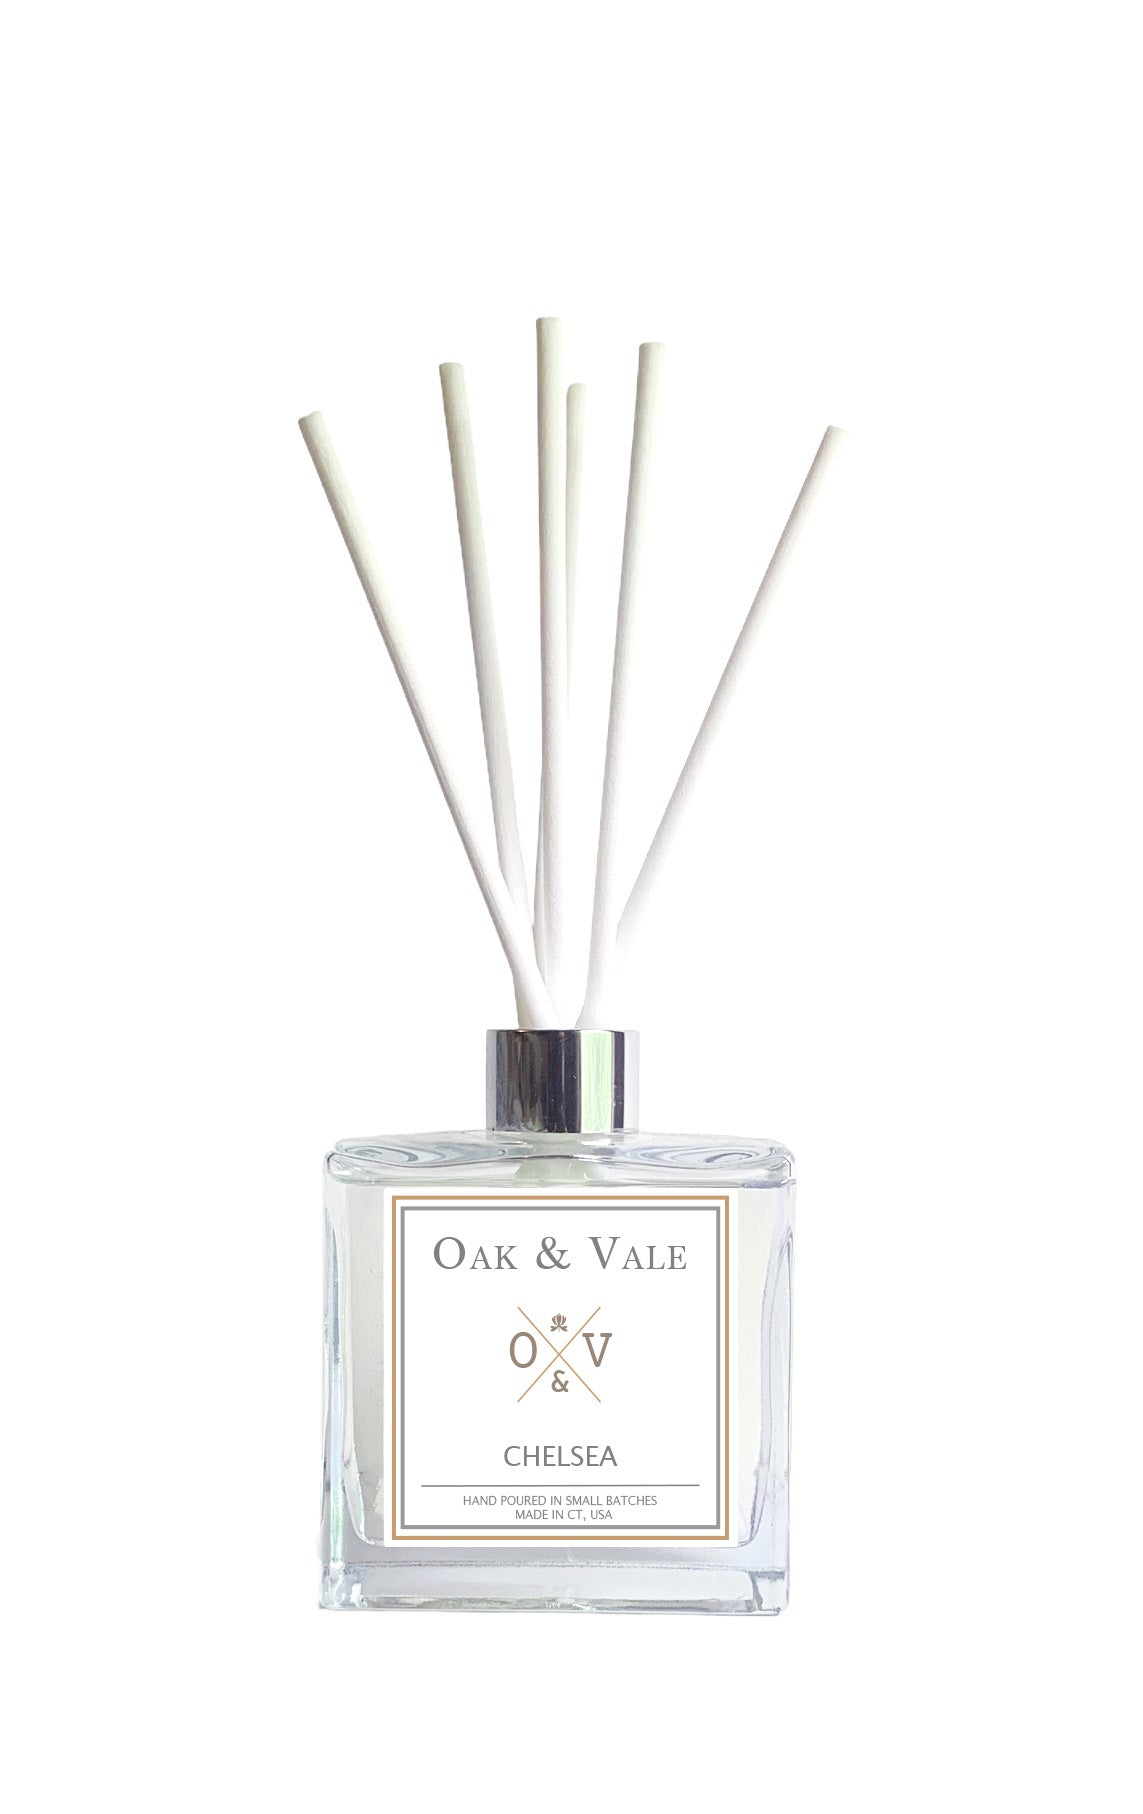 CHELSEA REED DIFFUSER